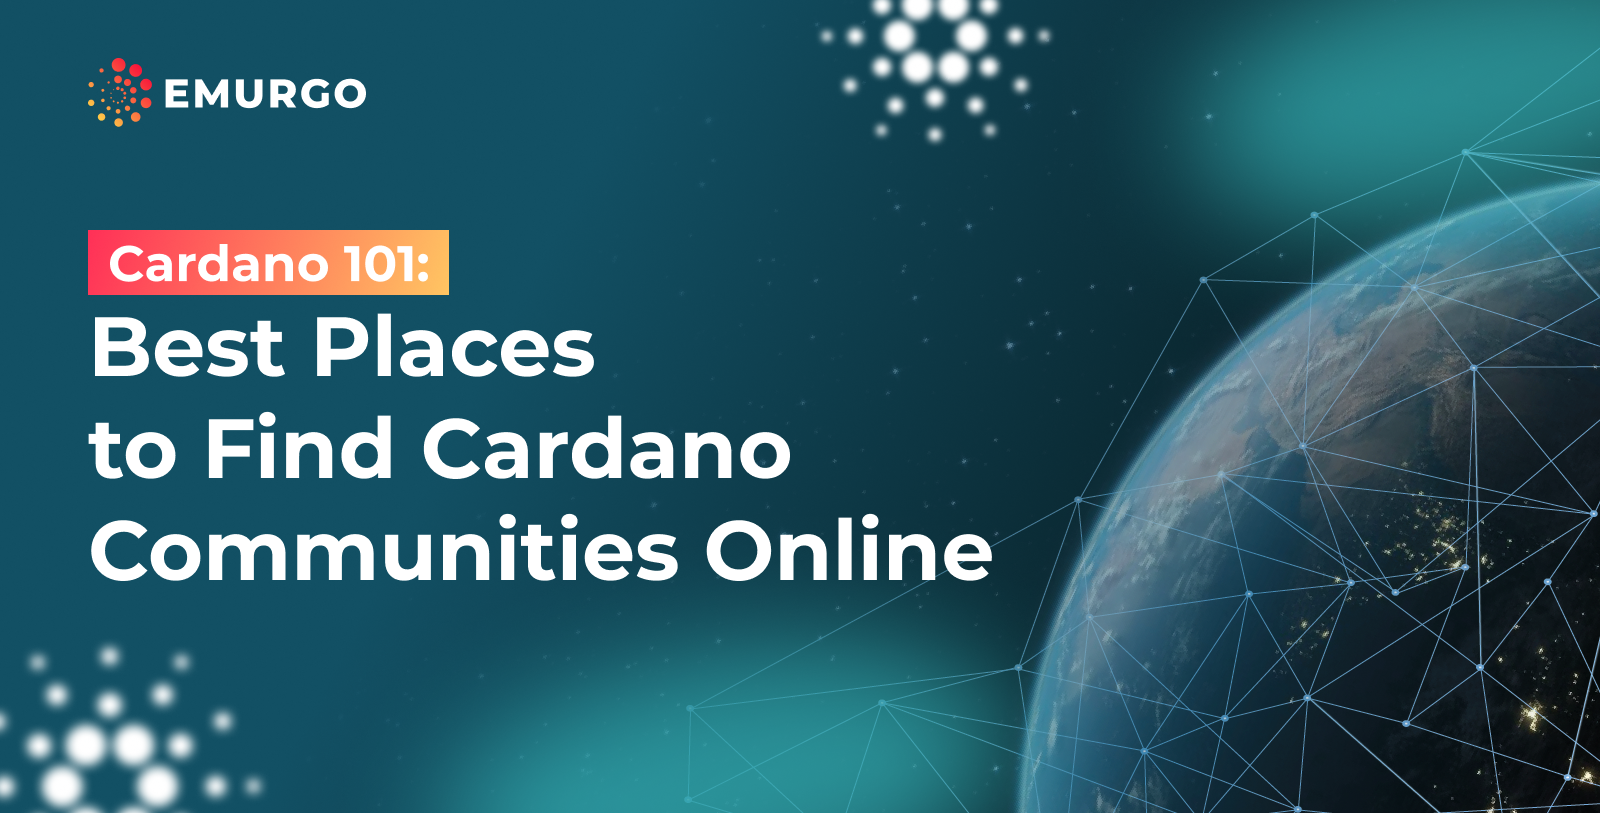 Cardano-101-Best-Places-Cardano-Communities-Online.png